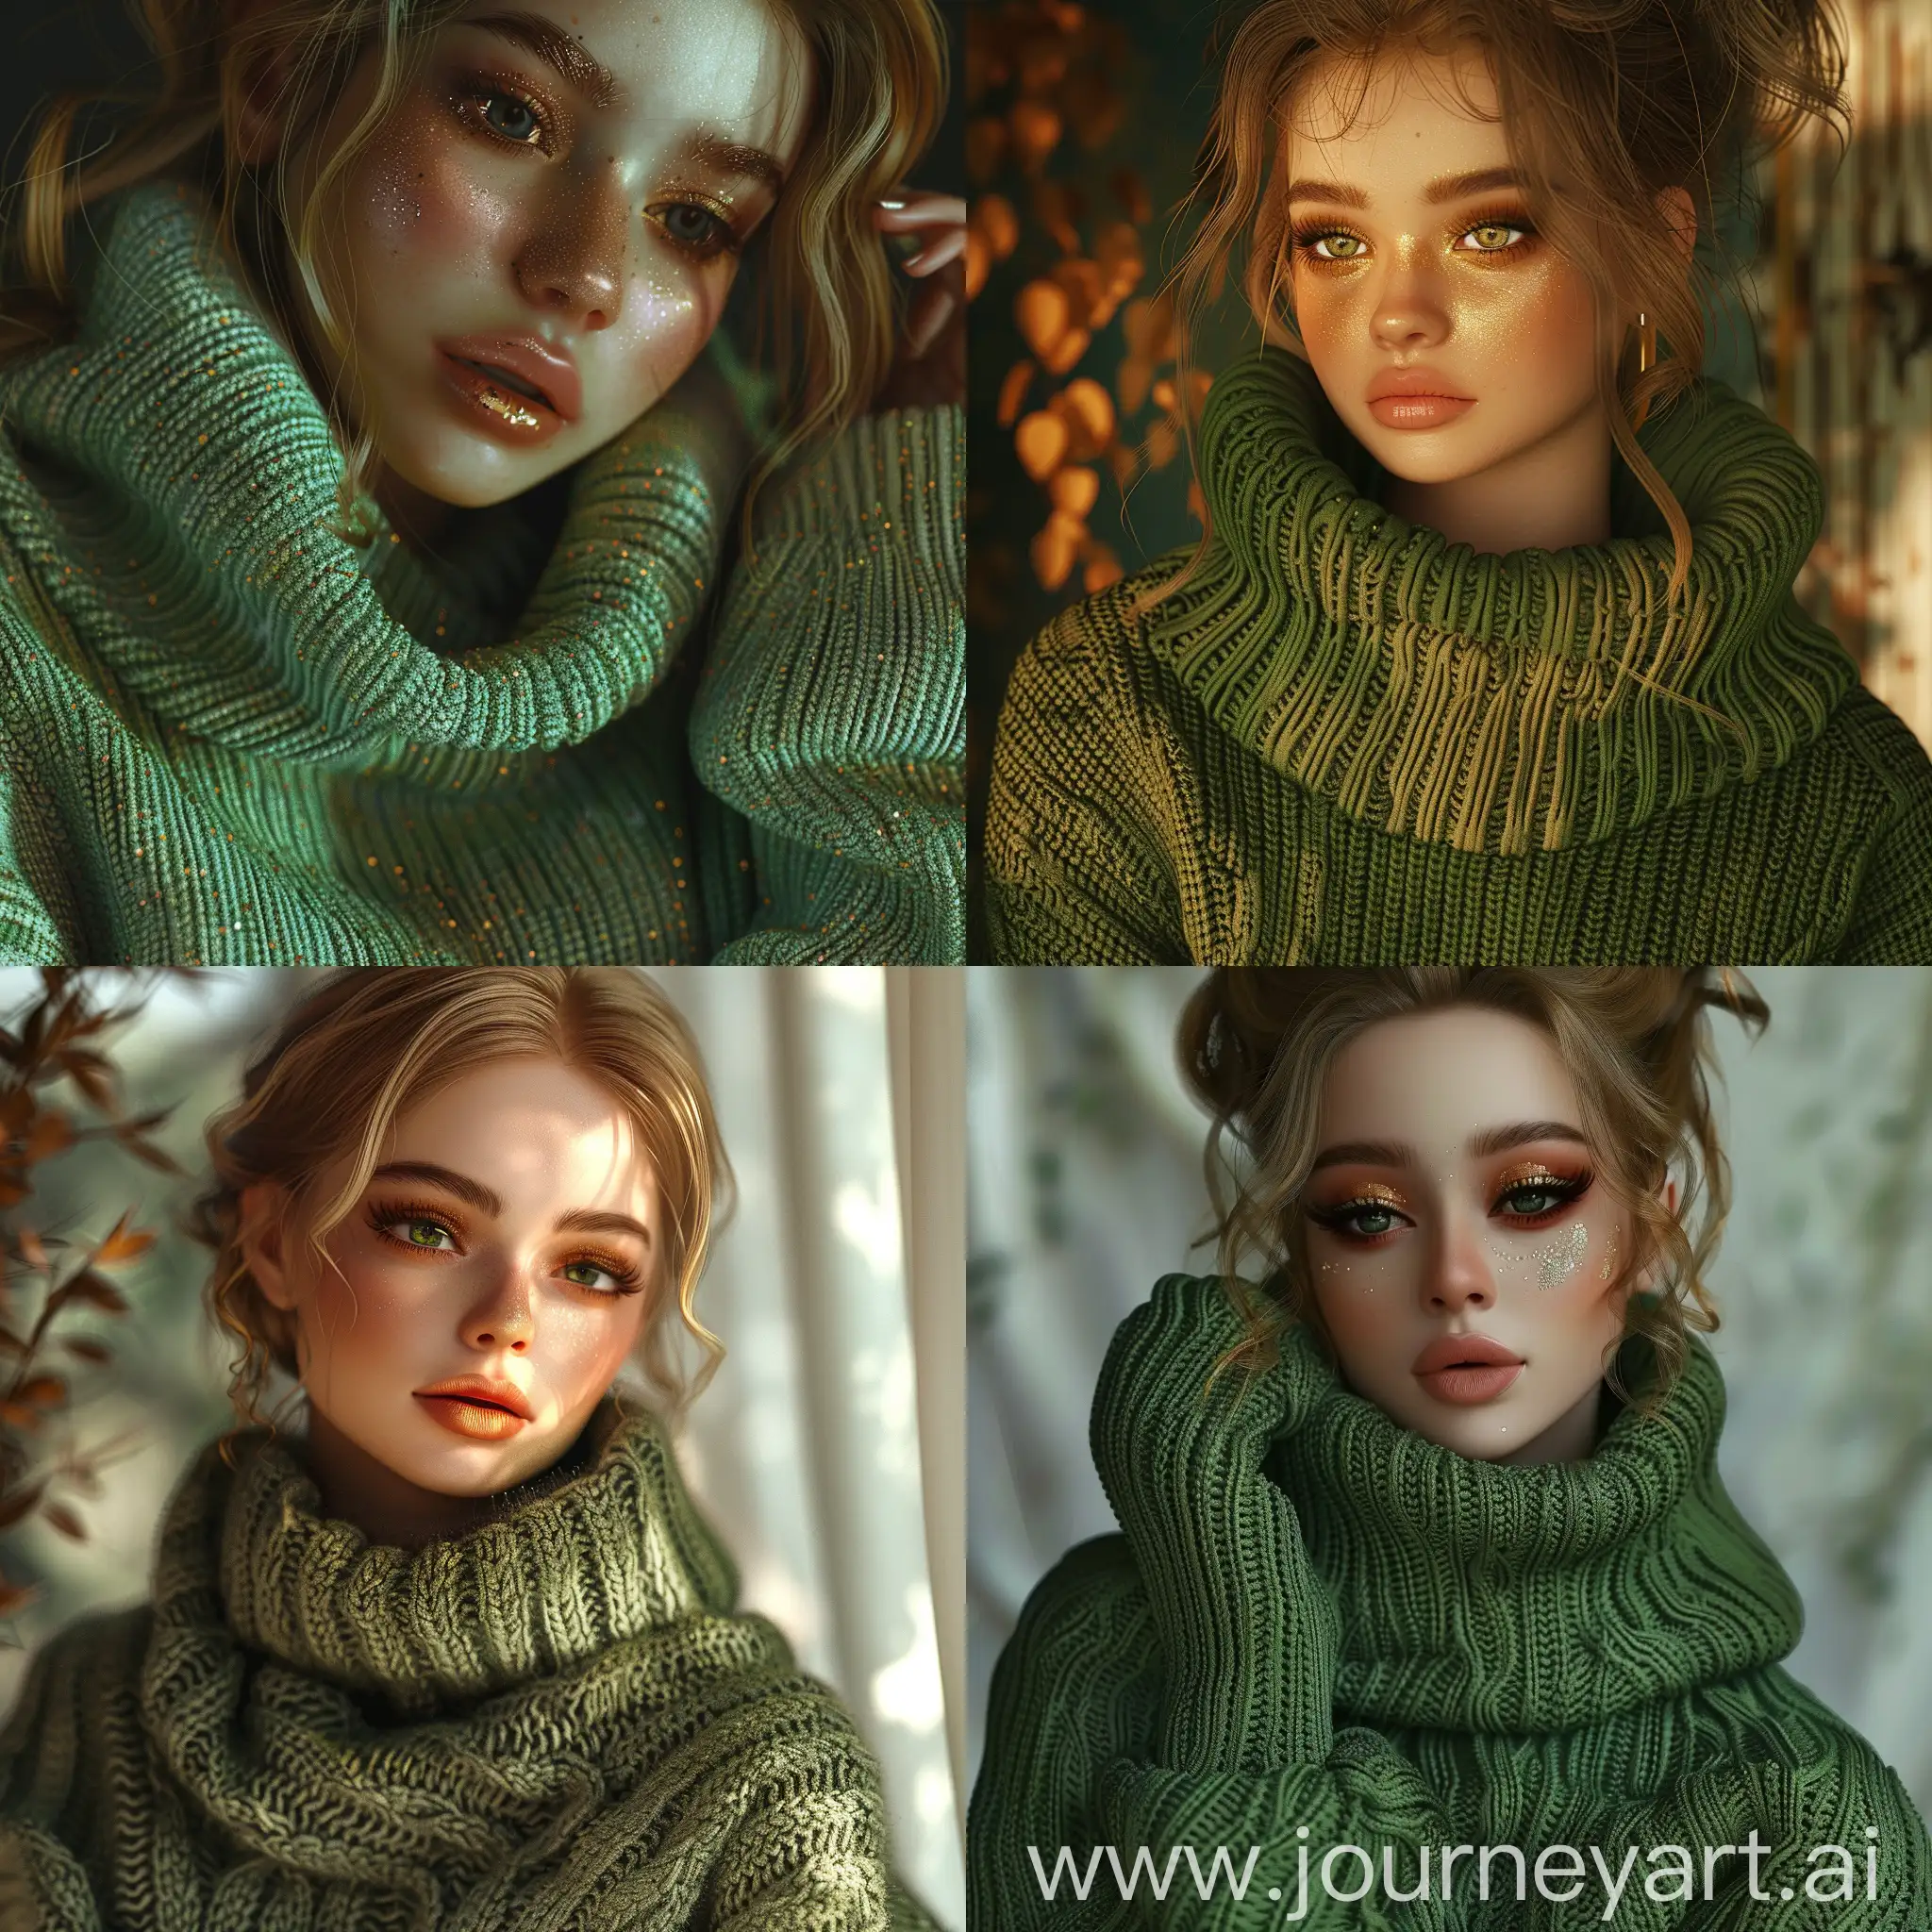 Exquisite-GoldenHaired-Woman-in-Oversized-Green-Sweater